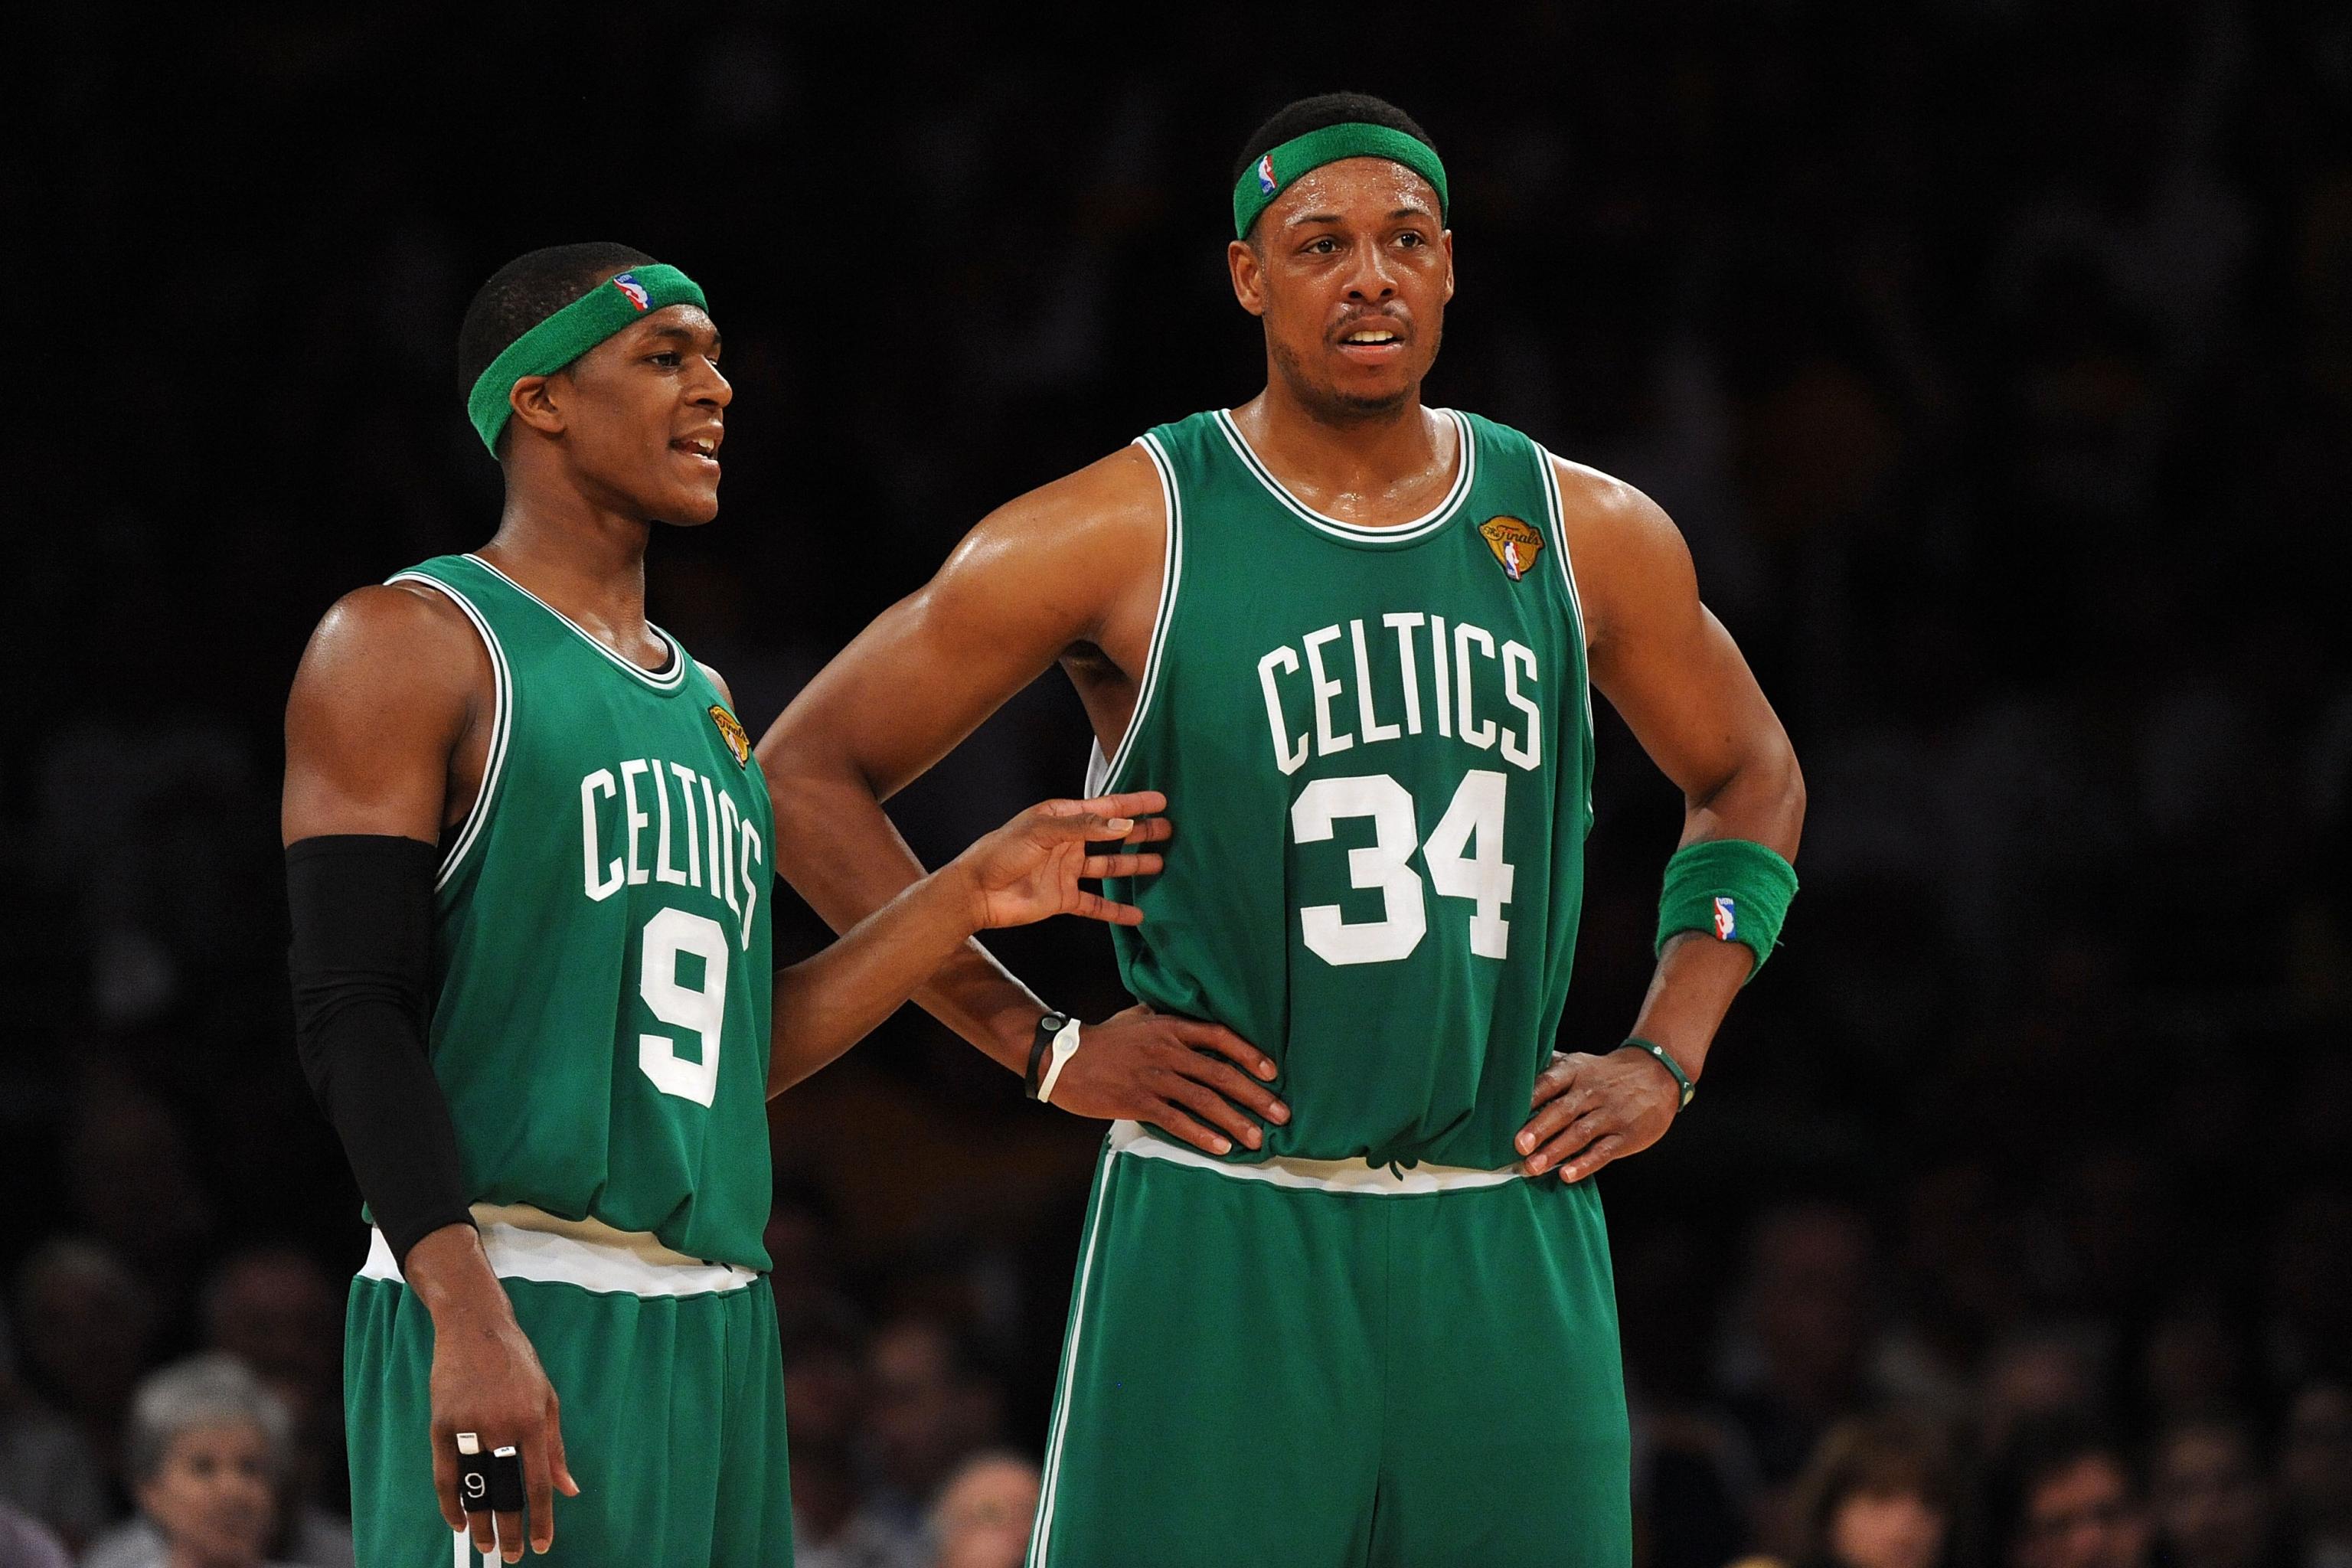 Rajon Rondo is BACK!!!!! #9  Basketball pictures, Sports pictures, Celtics  basketball